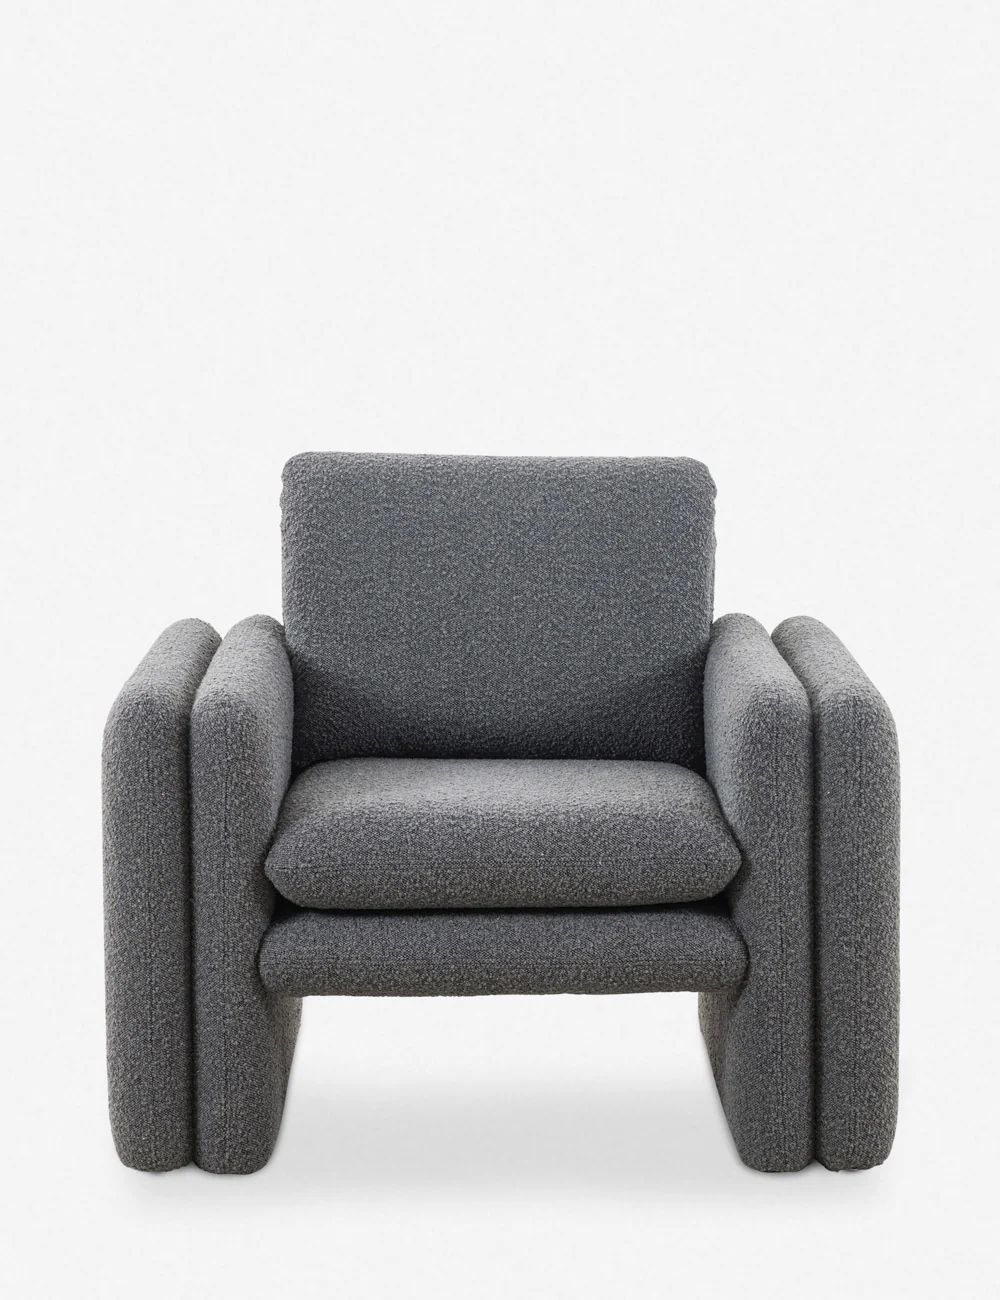 Orme Accent Chair | Lulu and Georgia 